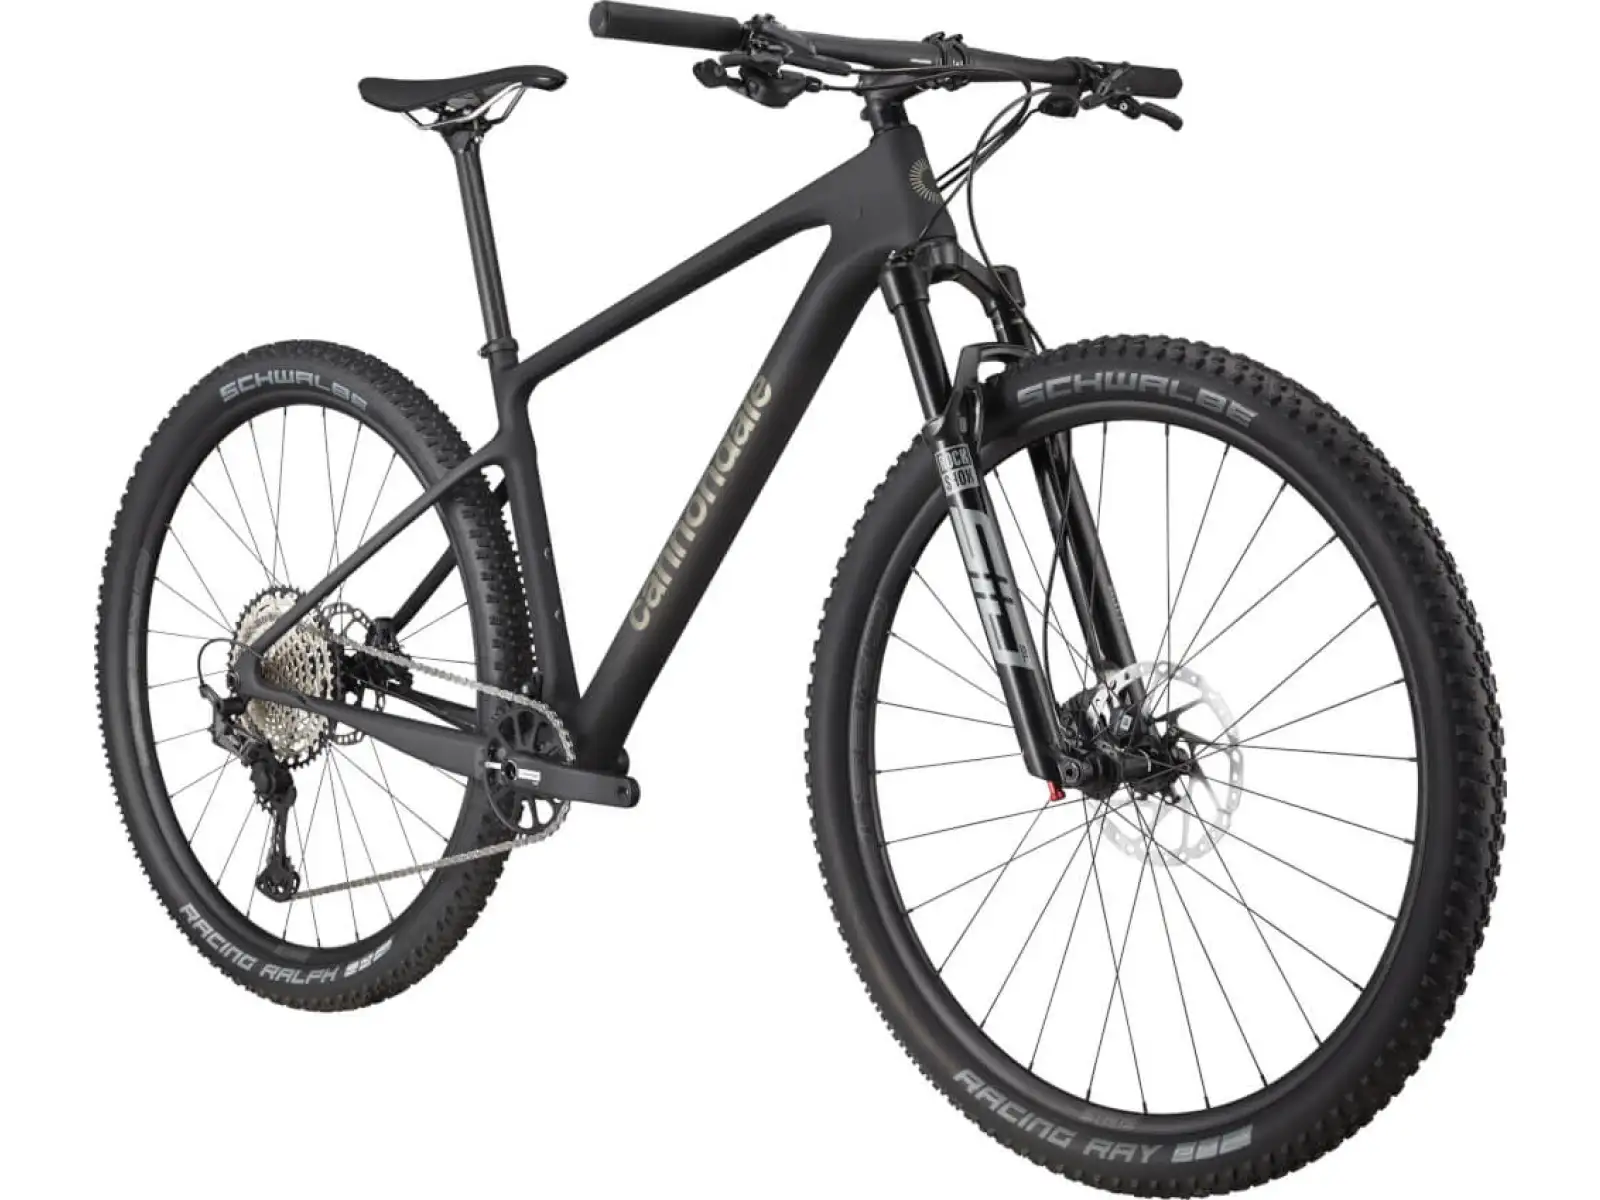 Cannondale Scalpel HT Carbon 3 CRB BLK horský bicykel